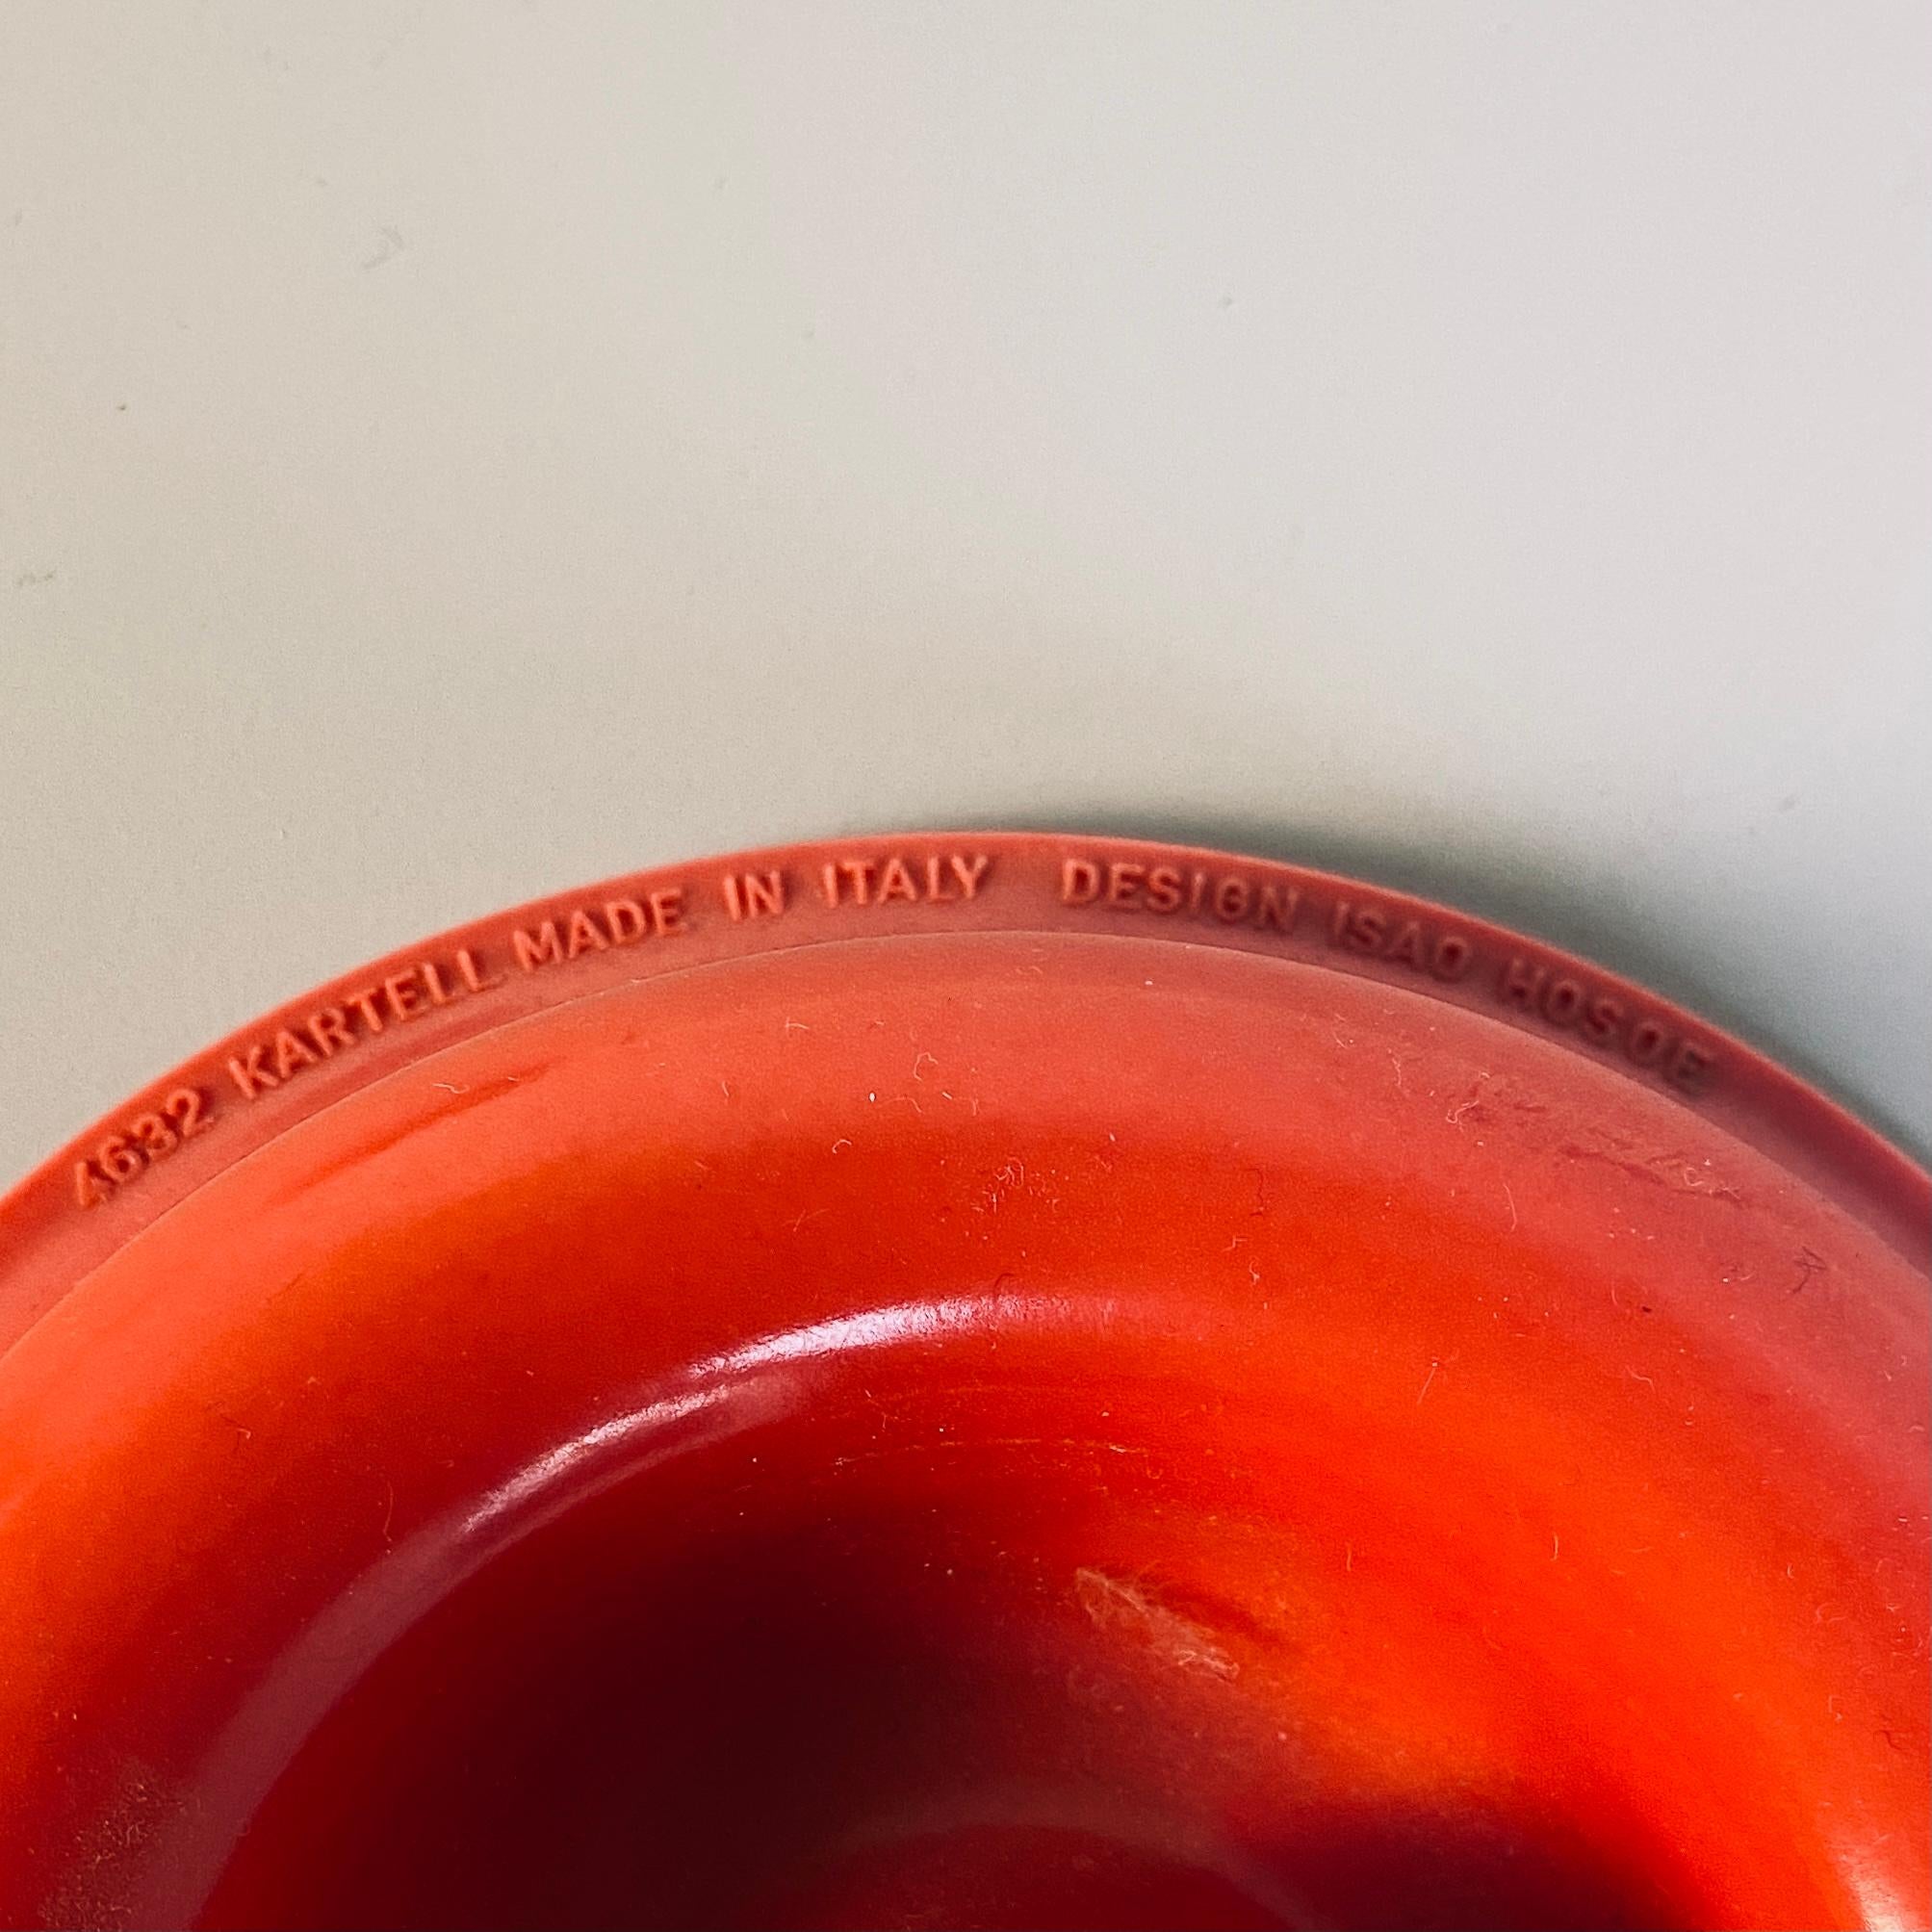 Late 20th Century Italian Red Plastic Ashtray Mod 4632 \ 4636 by Isao Hosoe for Kartell, 1971